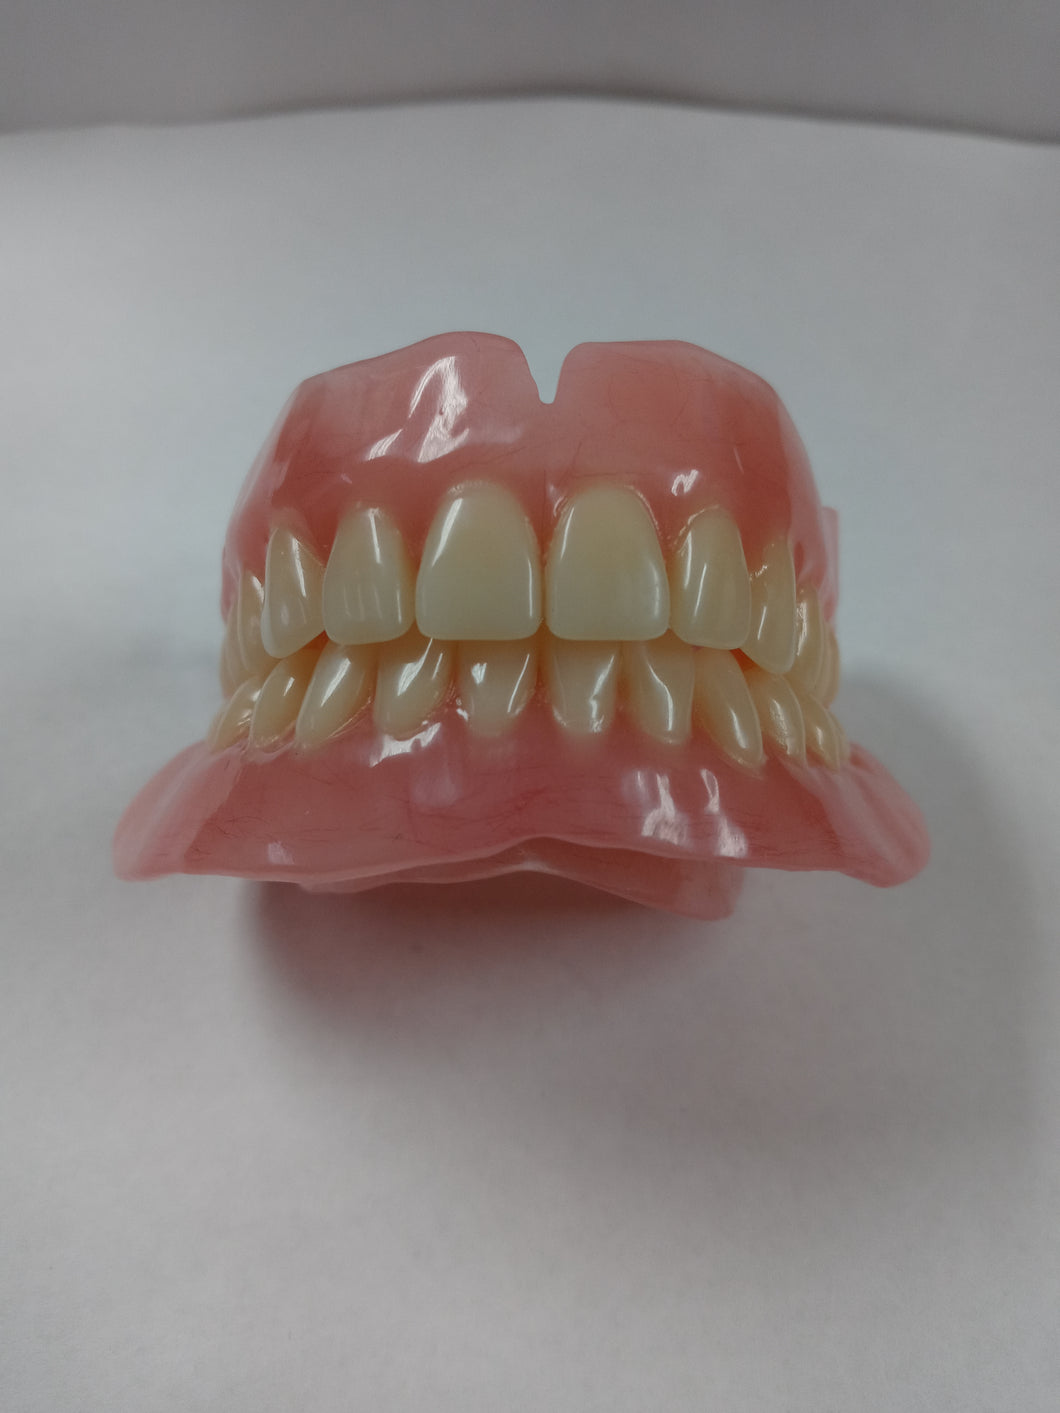 Dentures Upper And Lower Medium Pink Full set Acrylic False Teeth A2 Shade Size Lower 2.5 inches Size upper 2.5 Inches